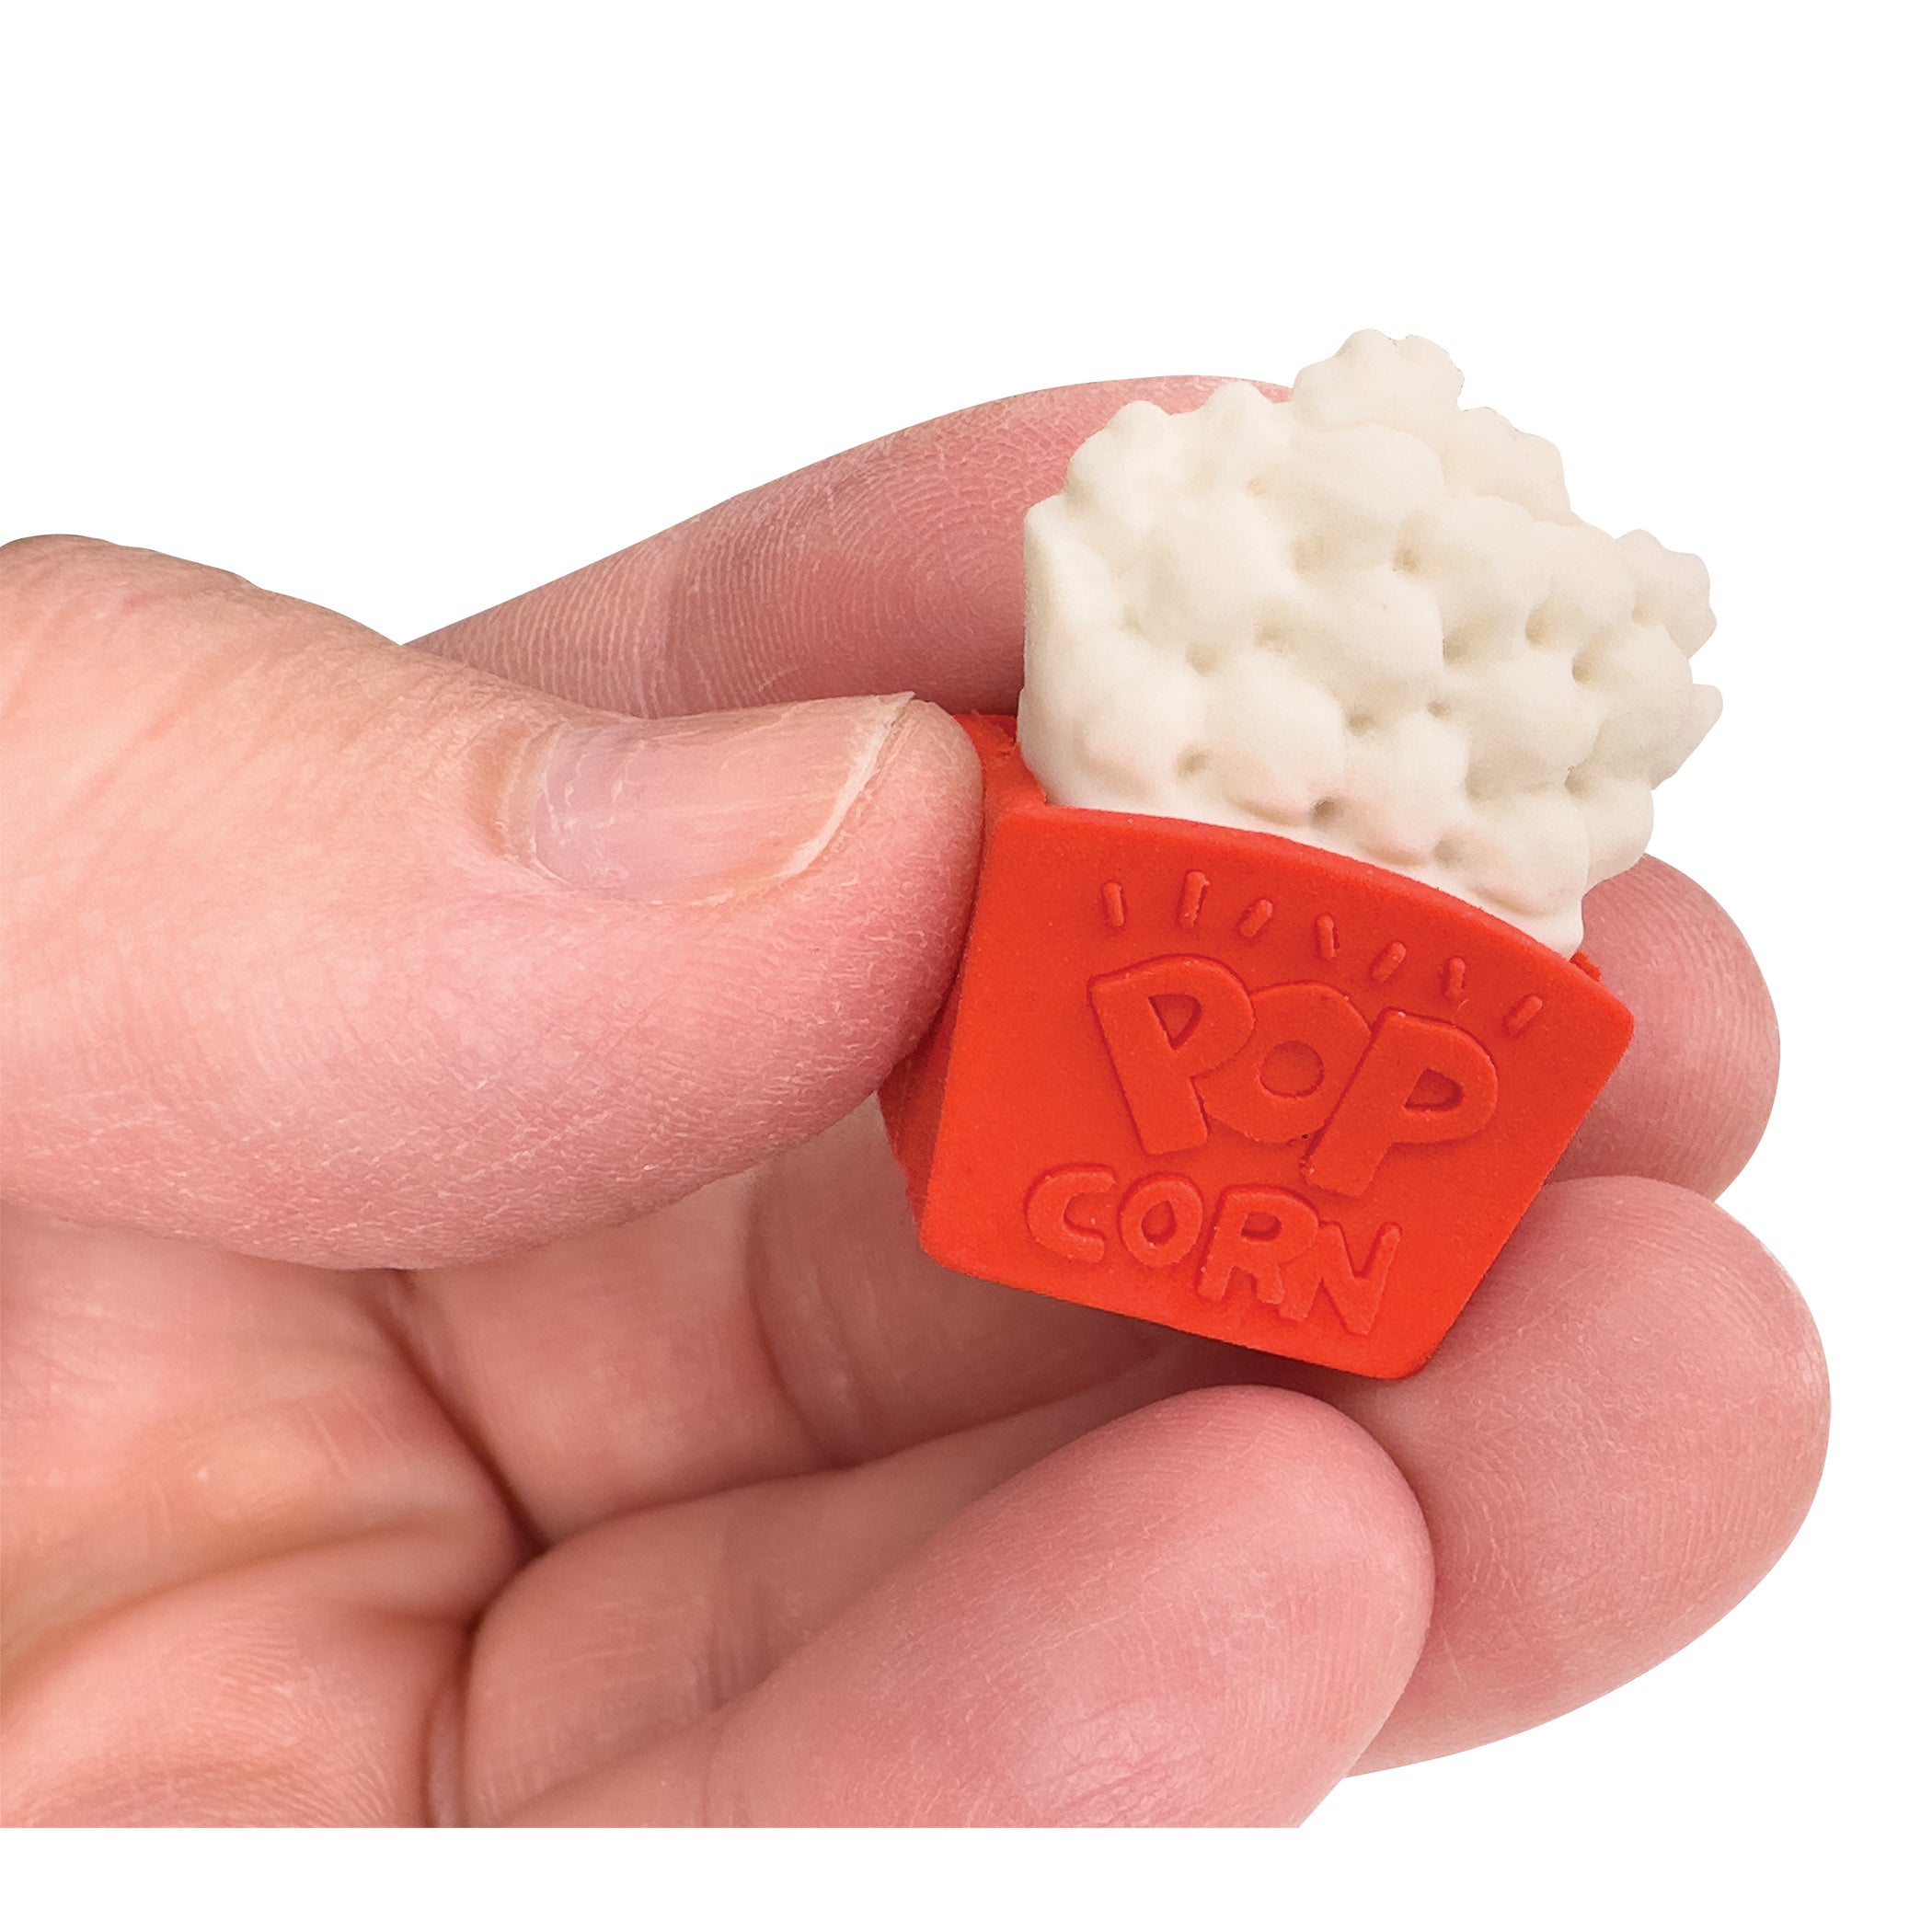 Snack Attack II 3D Erasers